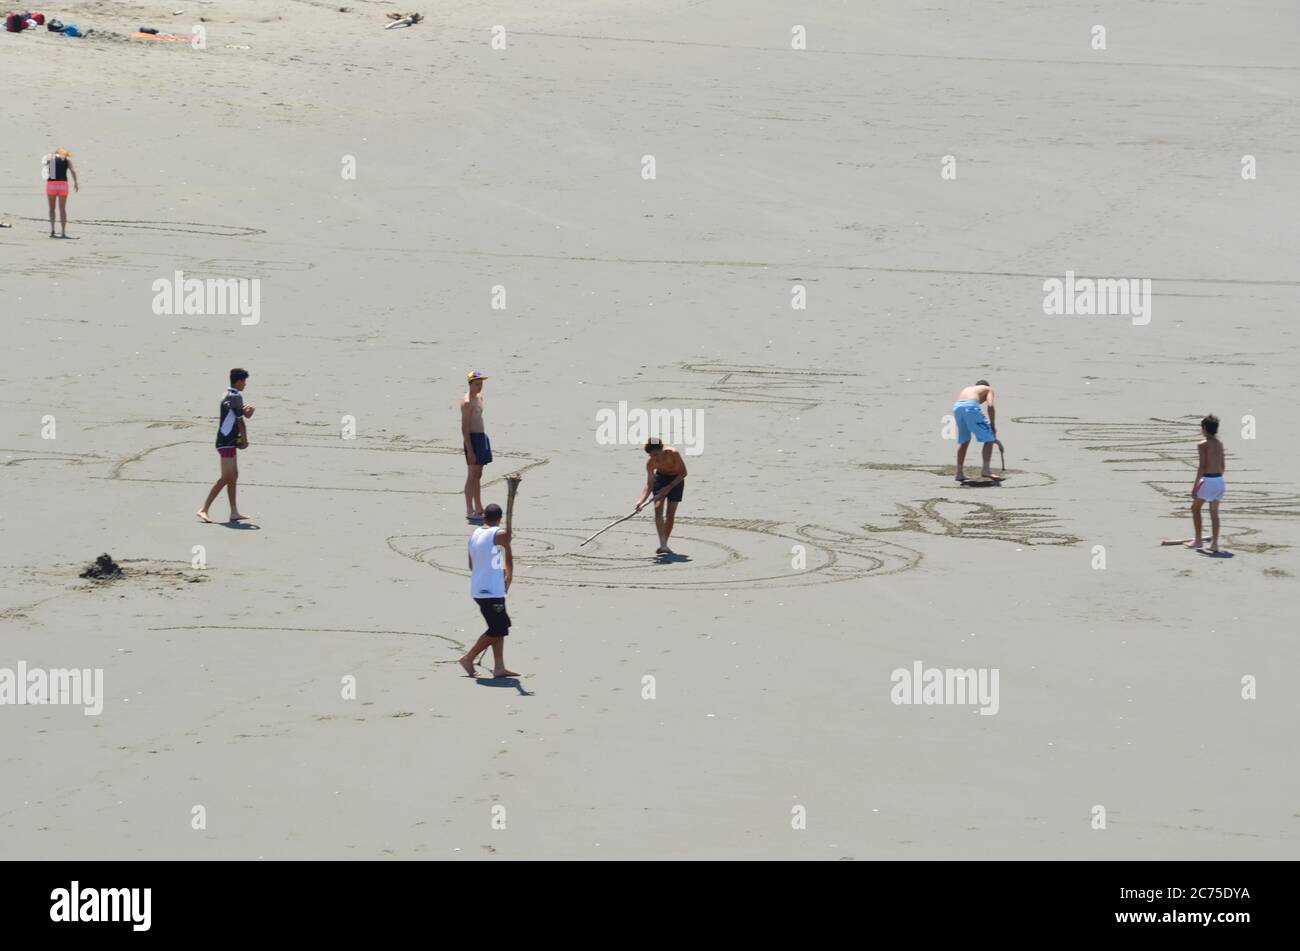 Beautiful New Brighton beach, New Zealand with people playing along the beach during hot afternoon day. Stock Photo